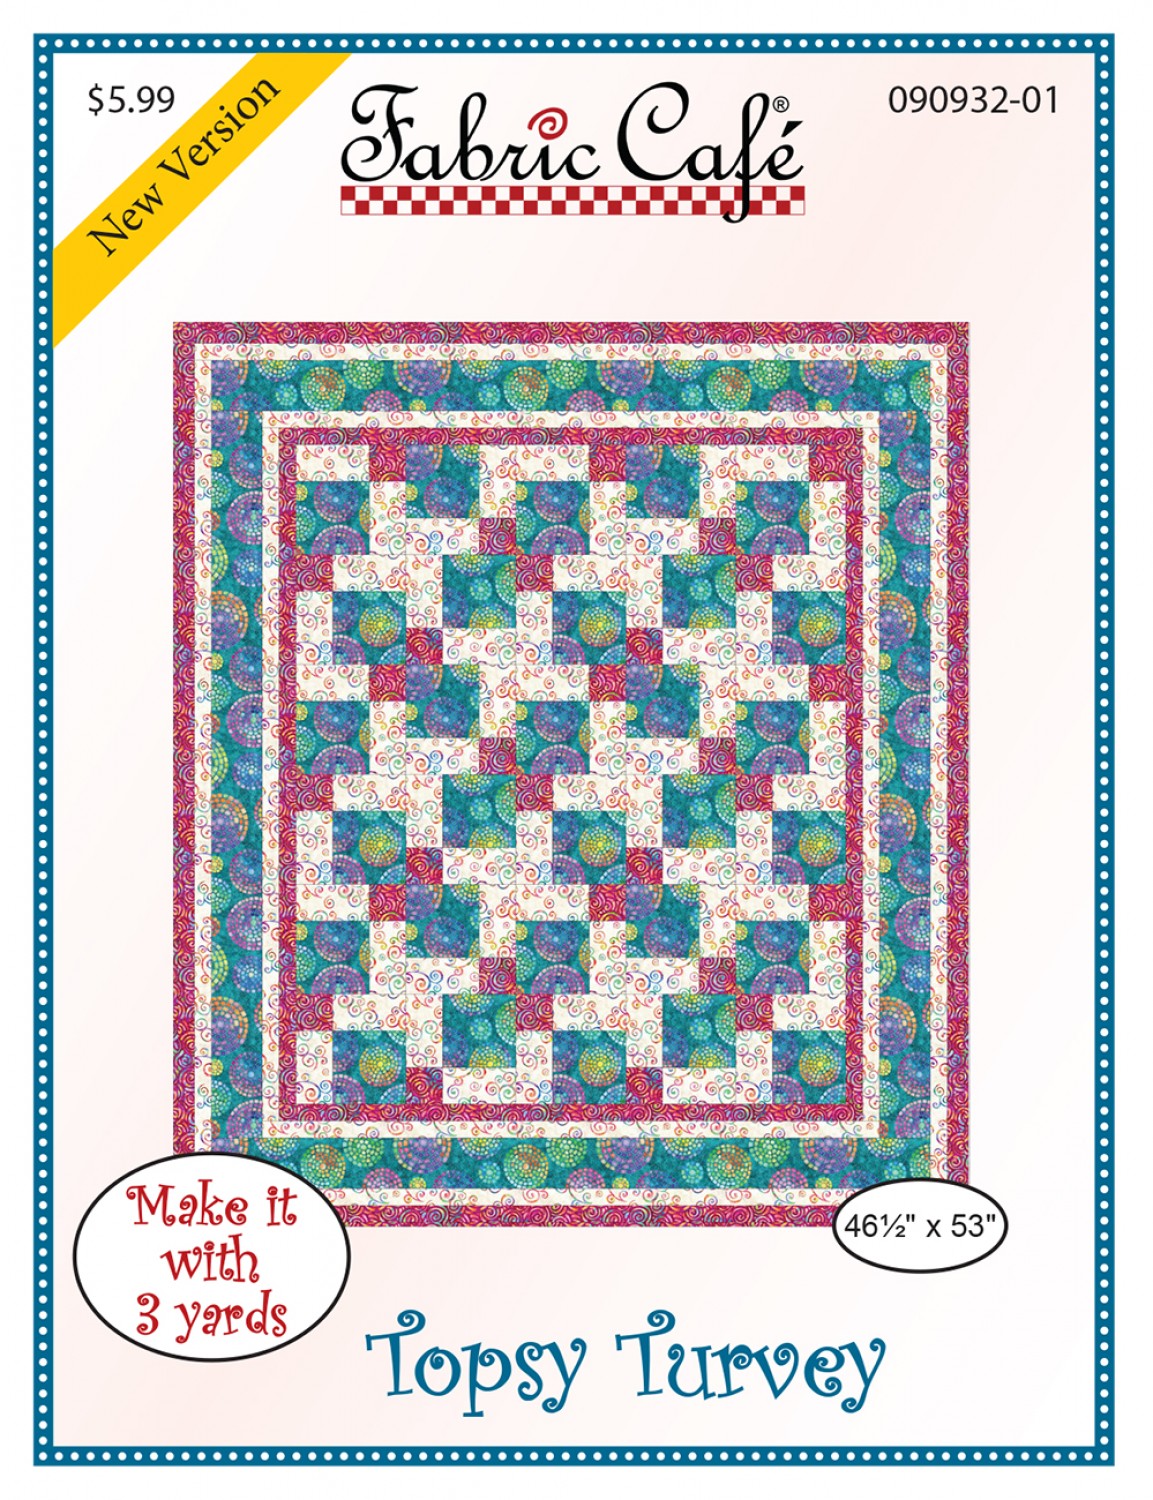 Topsy Turvey - Quilt Pattern - Fabric Cafe